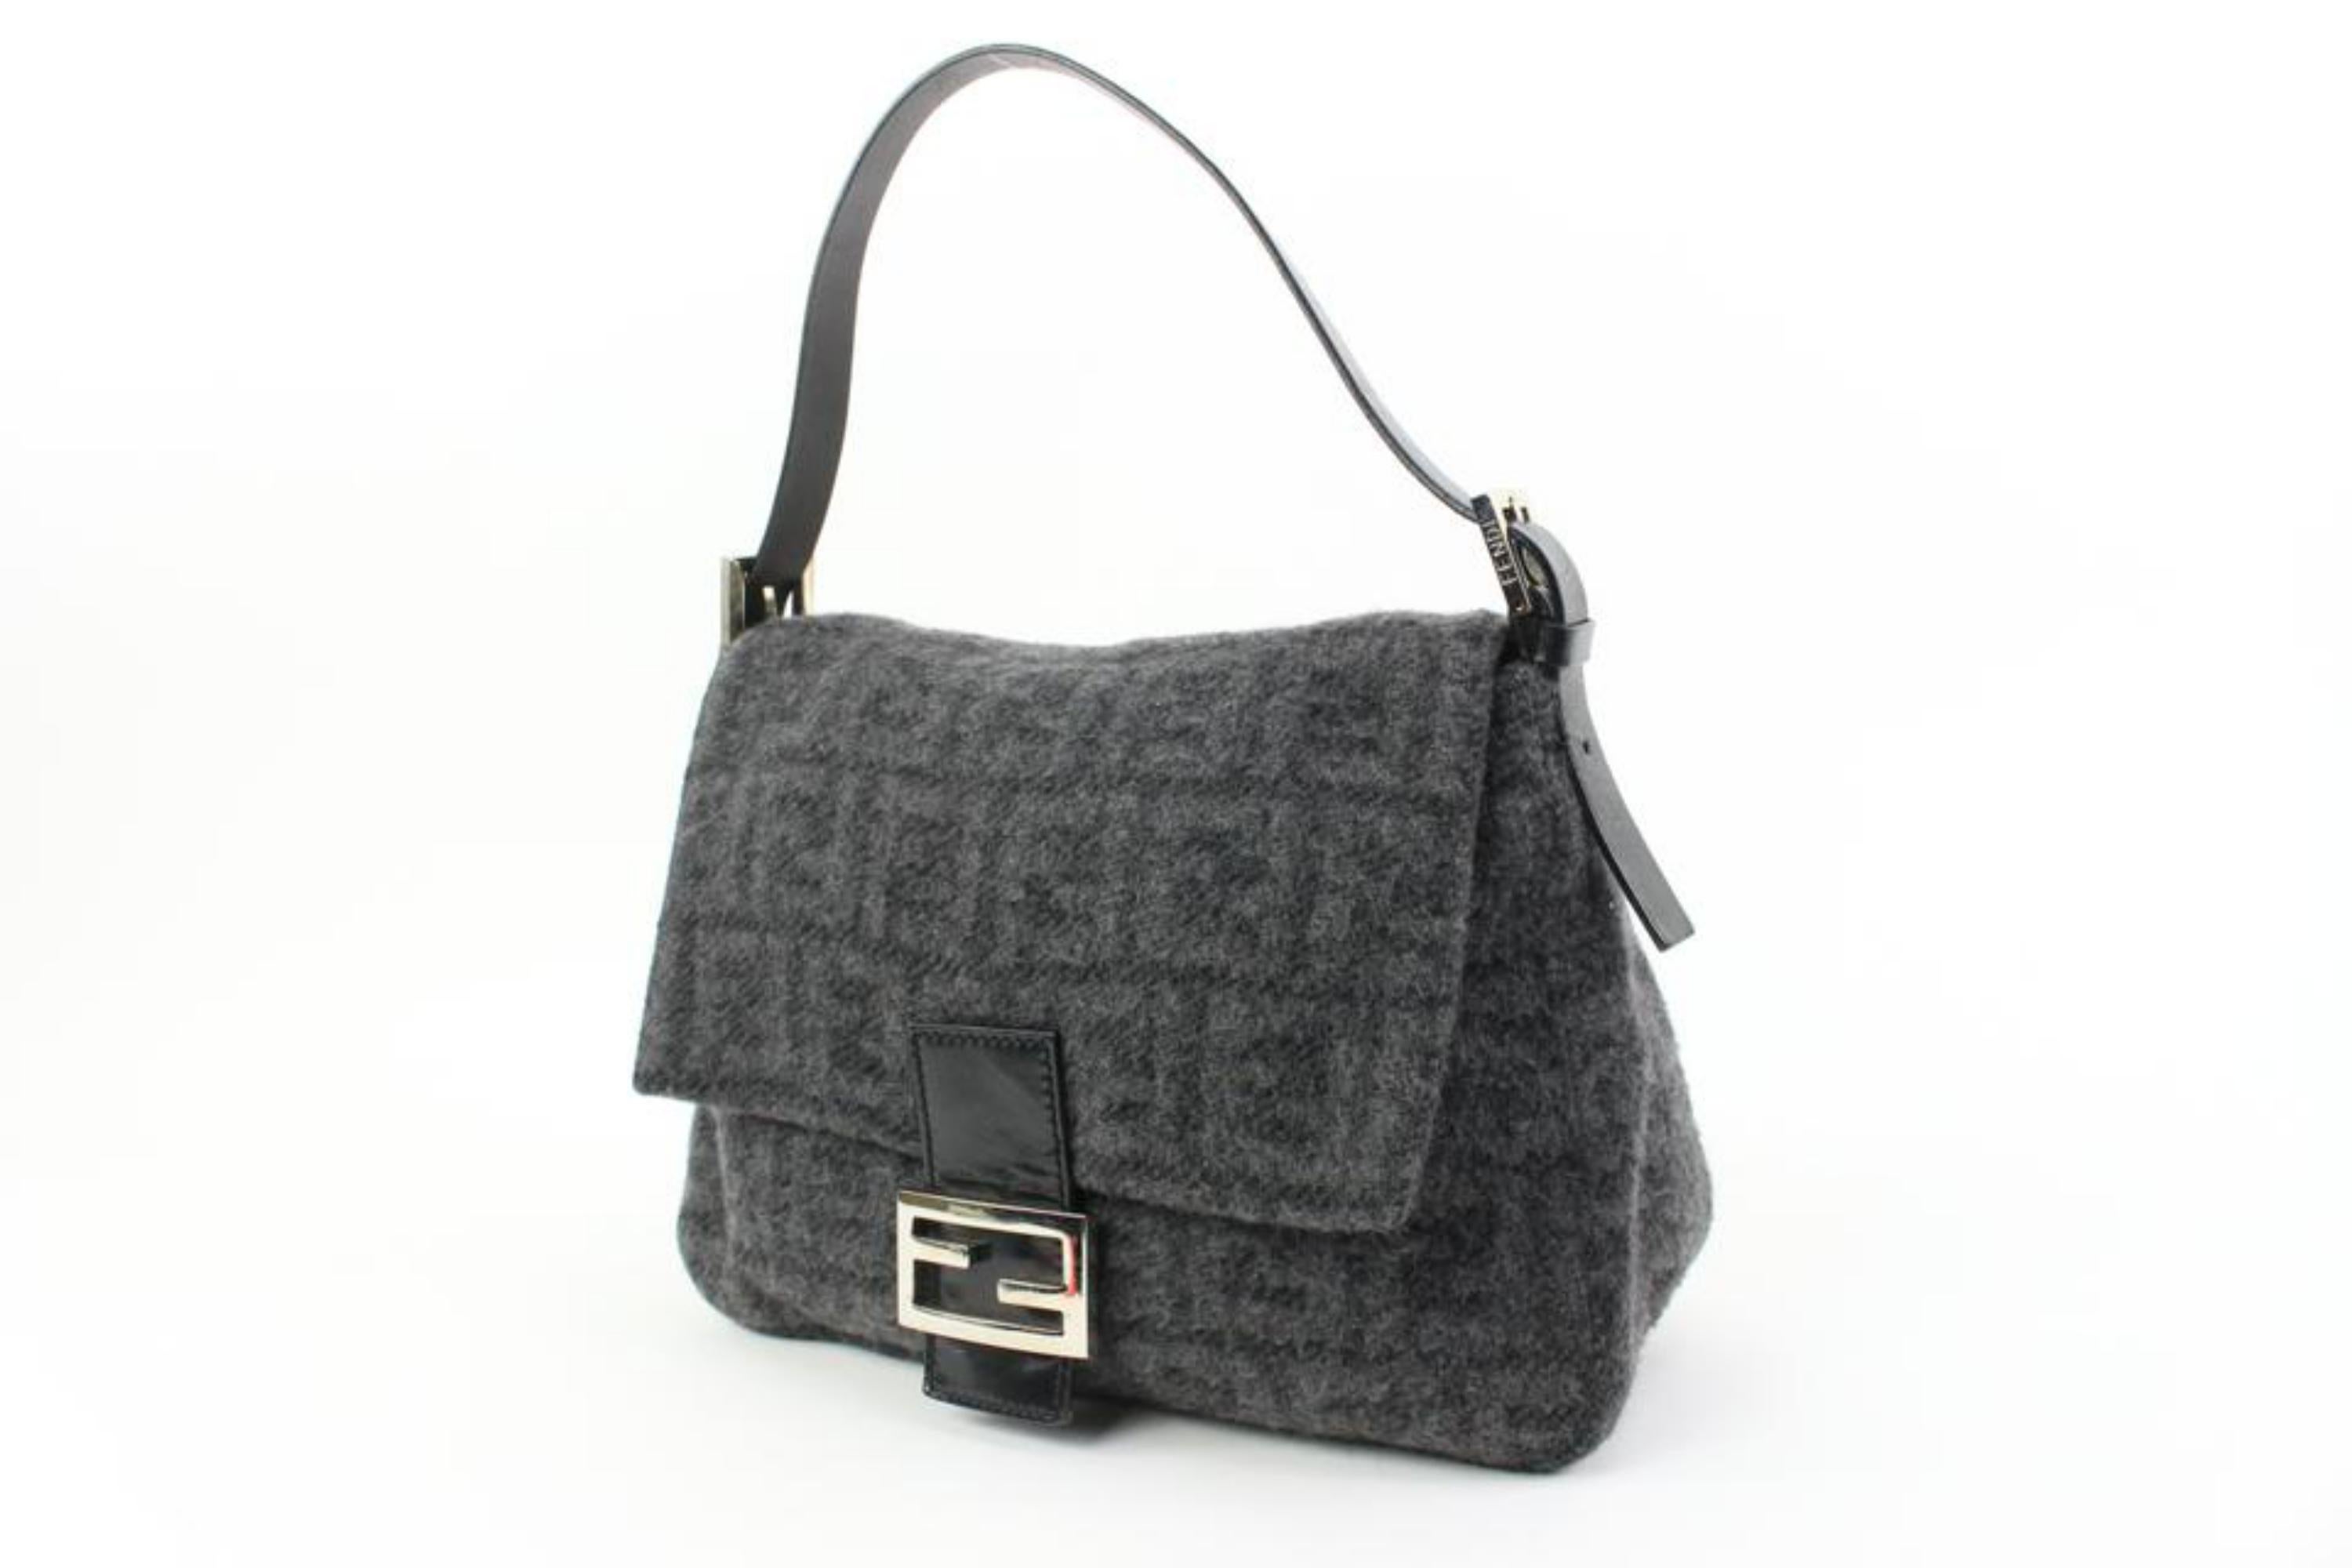 Fendi Charcoal Cashmere FF Zucca Mama Forever Baguette Shoulder bag 45f314s
Date Code/Serial Number: 2308-26325-009
Made In: Italy
Measurements: Length:  11.5